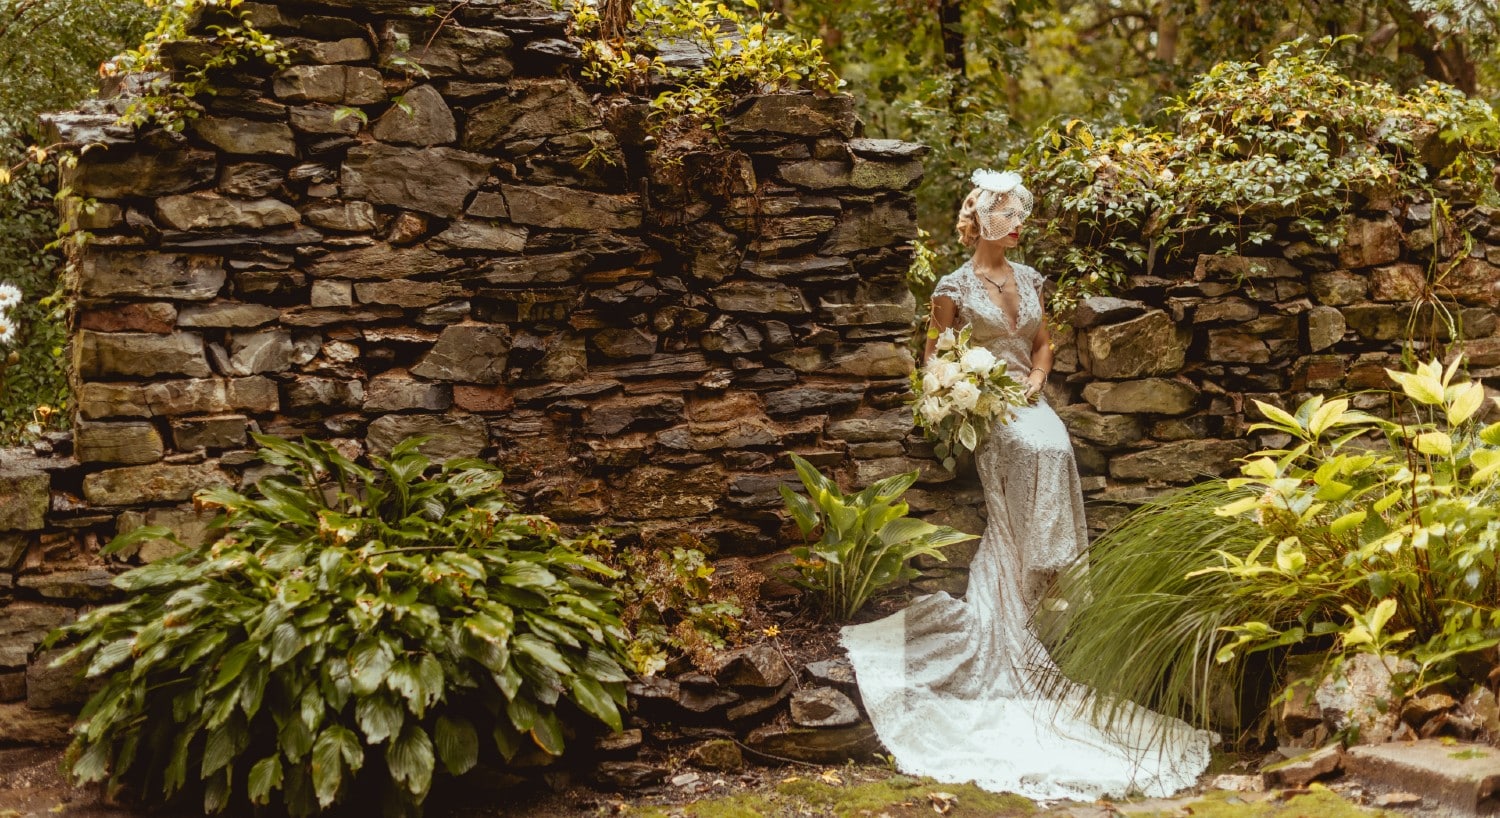 A stunning bride in a white gown sitting atop a small nook in a wall of stone surrounded by trees and plants